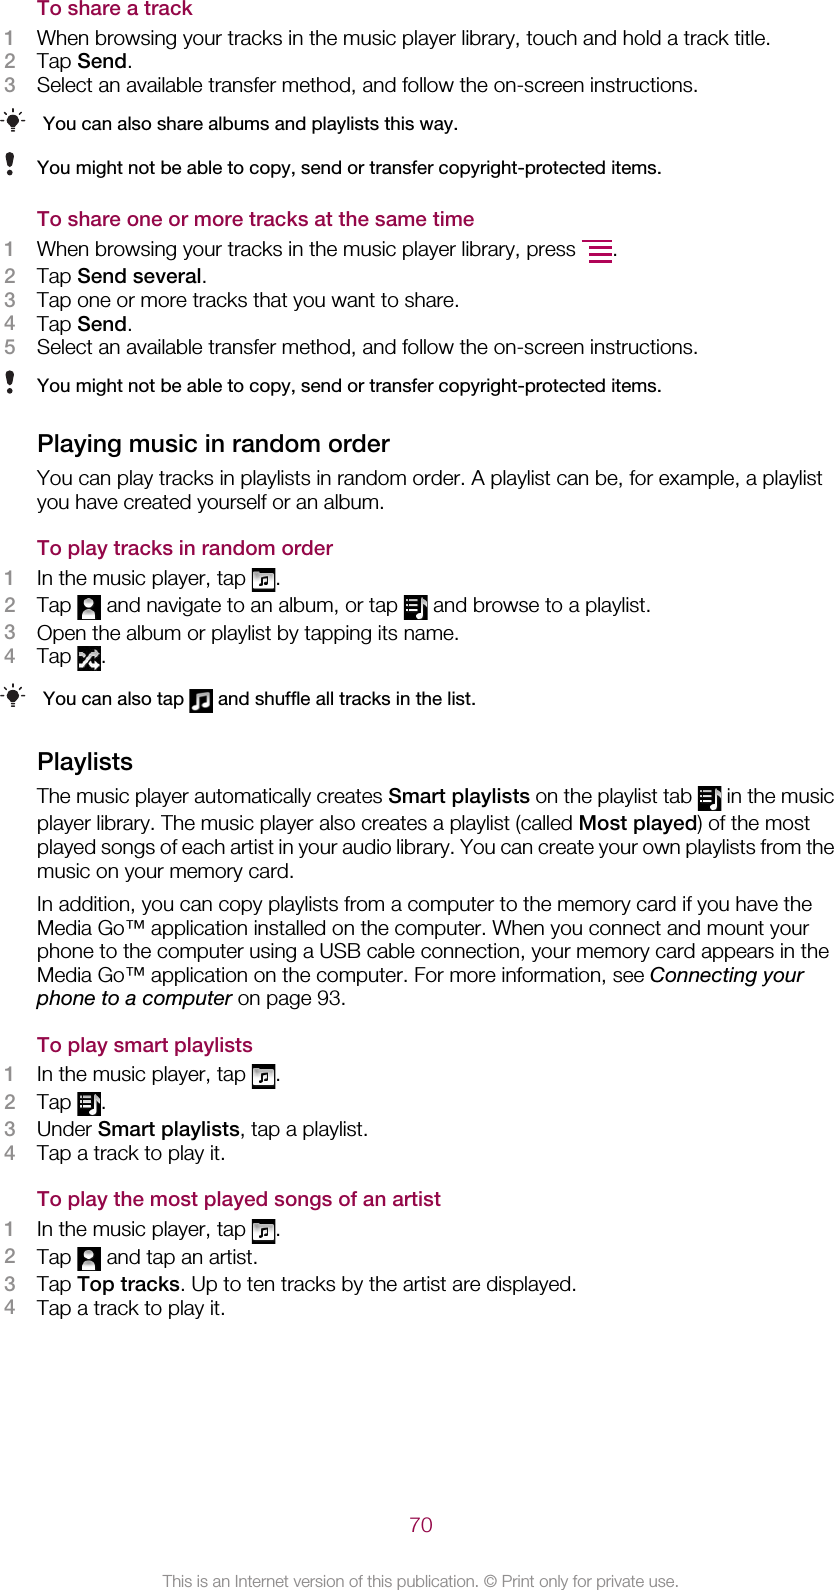 To share a track1When browsing your tracks in the music player library, touch and hold a track title.2Tap Send.3Select an available transfer method, and follow the on-screen instructions.You can also share albums and playlists this way.You might not be able to copy, send or transfer copyright-protected items.To share one or more tracks at the same time1When browsing your tracks in the music player library, press  .2Tap Send several.3Tap one or more tracks that you want to share.4Tap Send.5Select an available transfer method, and follow the on-screen instructions.You might not be able to copy, send or transfer copyright-protected items.Playing music in random orderYou can play tracks in playlists in random order. A playlist can be, for example, a playlistyou have created yourself or an album.To play tracks in random order1In the music player, tap  .2Tap   and navigate to an album, or tap   and browse to a playlist.3Open the album or playlist by tapping its name.4Tap  .You can also tap   and shuffle all tracks in the list.PlaylistsThe music player automatically creates Smart playlists on the playlist tab   in the musicplayer library. The music player also creates a playlist (called Most played) of the mostplayed songs of each artist in your audio library. You can create your own playlists from themusic on your memory card.In addition, you can copy playlists from a computer to the memory card if you have theMedia Go™ application installed on the computer. When you connect and mount yourphone to the computer using a USB cable connection, your memory card appears in theMedia Go™ application on the computer. For more information, see Connecting yourphone to a computer on page 93.To play smart playlists1In the music player, tap  .2Tap  .3Under Smart playlists, tap a playlist.4Tap a track to play it.To play the most played songs of an artist1In the music player, tap  .2Tap   and tap an artist.3Tap Top tracks. Up to ten tracks by the artist are displayed.4Tap a track to play it.70This is an Internet version of this publication. © Print only for private use.